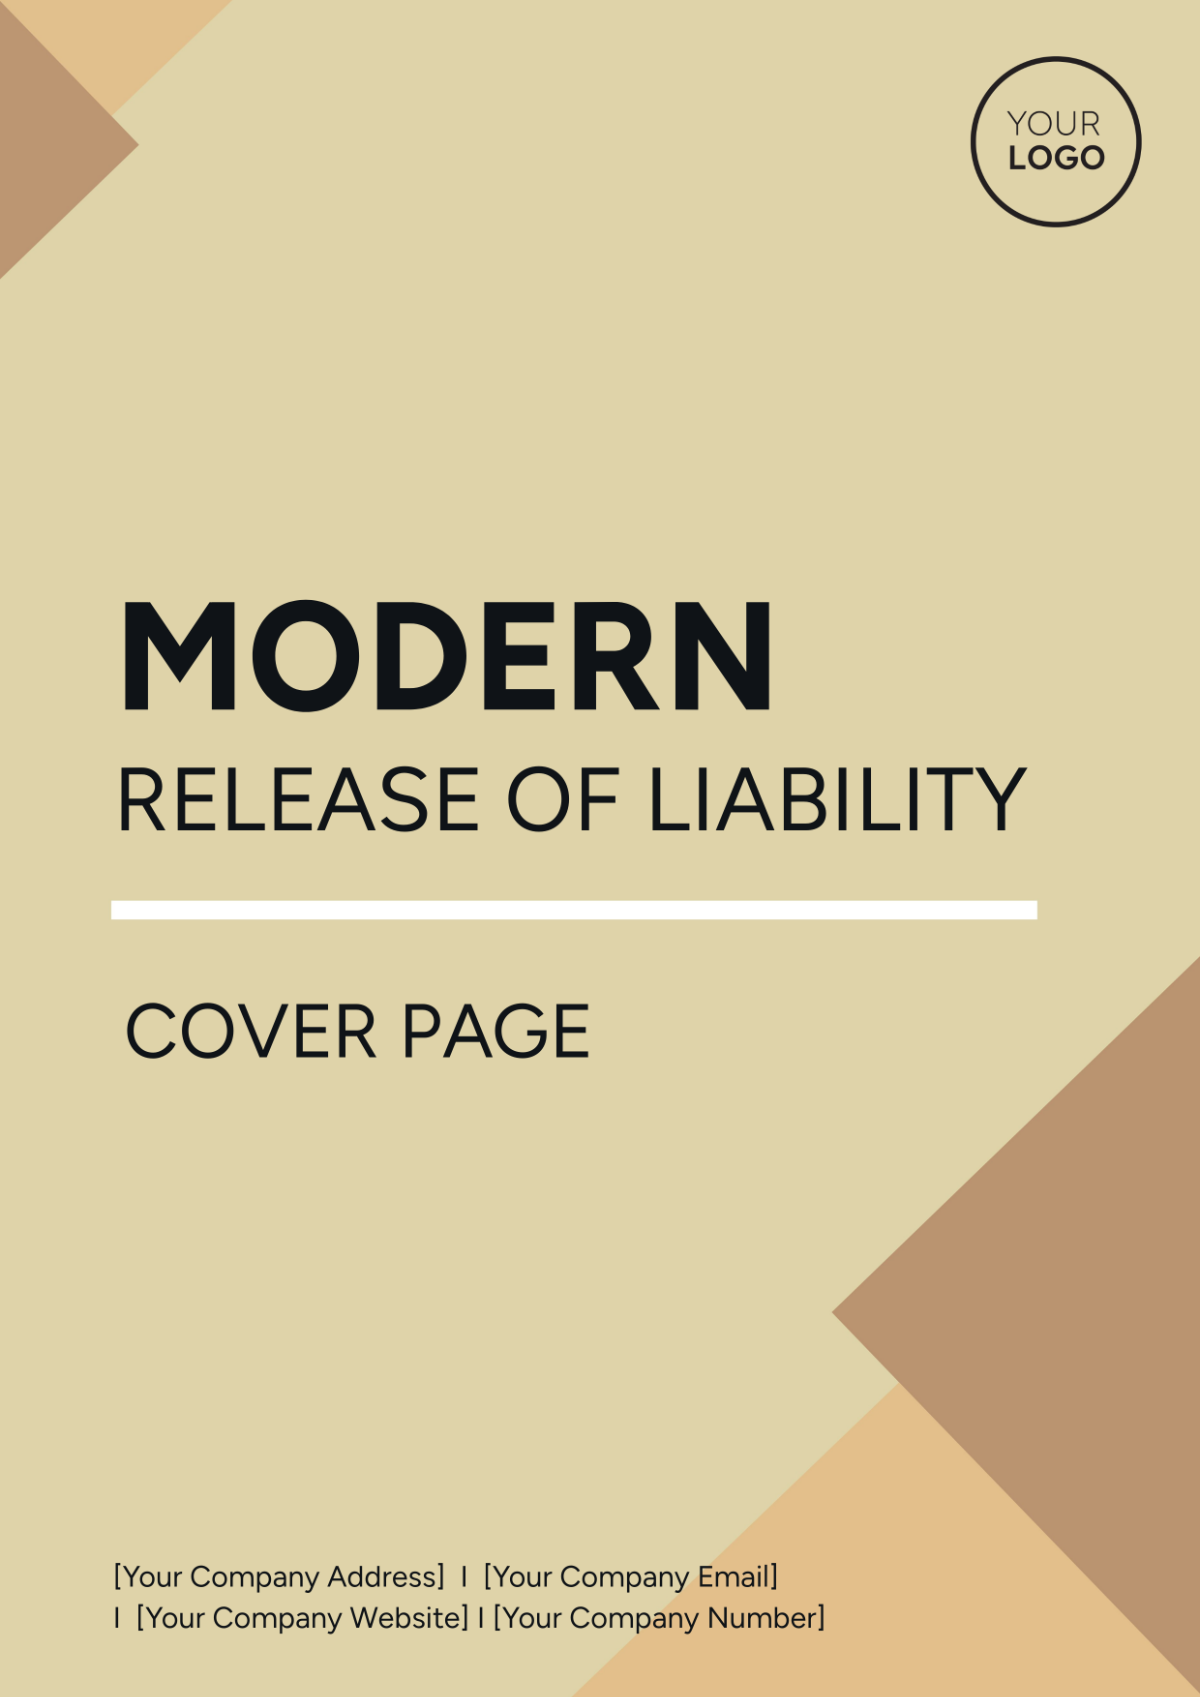 Modern Release of Liability Cover Page